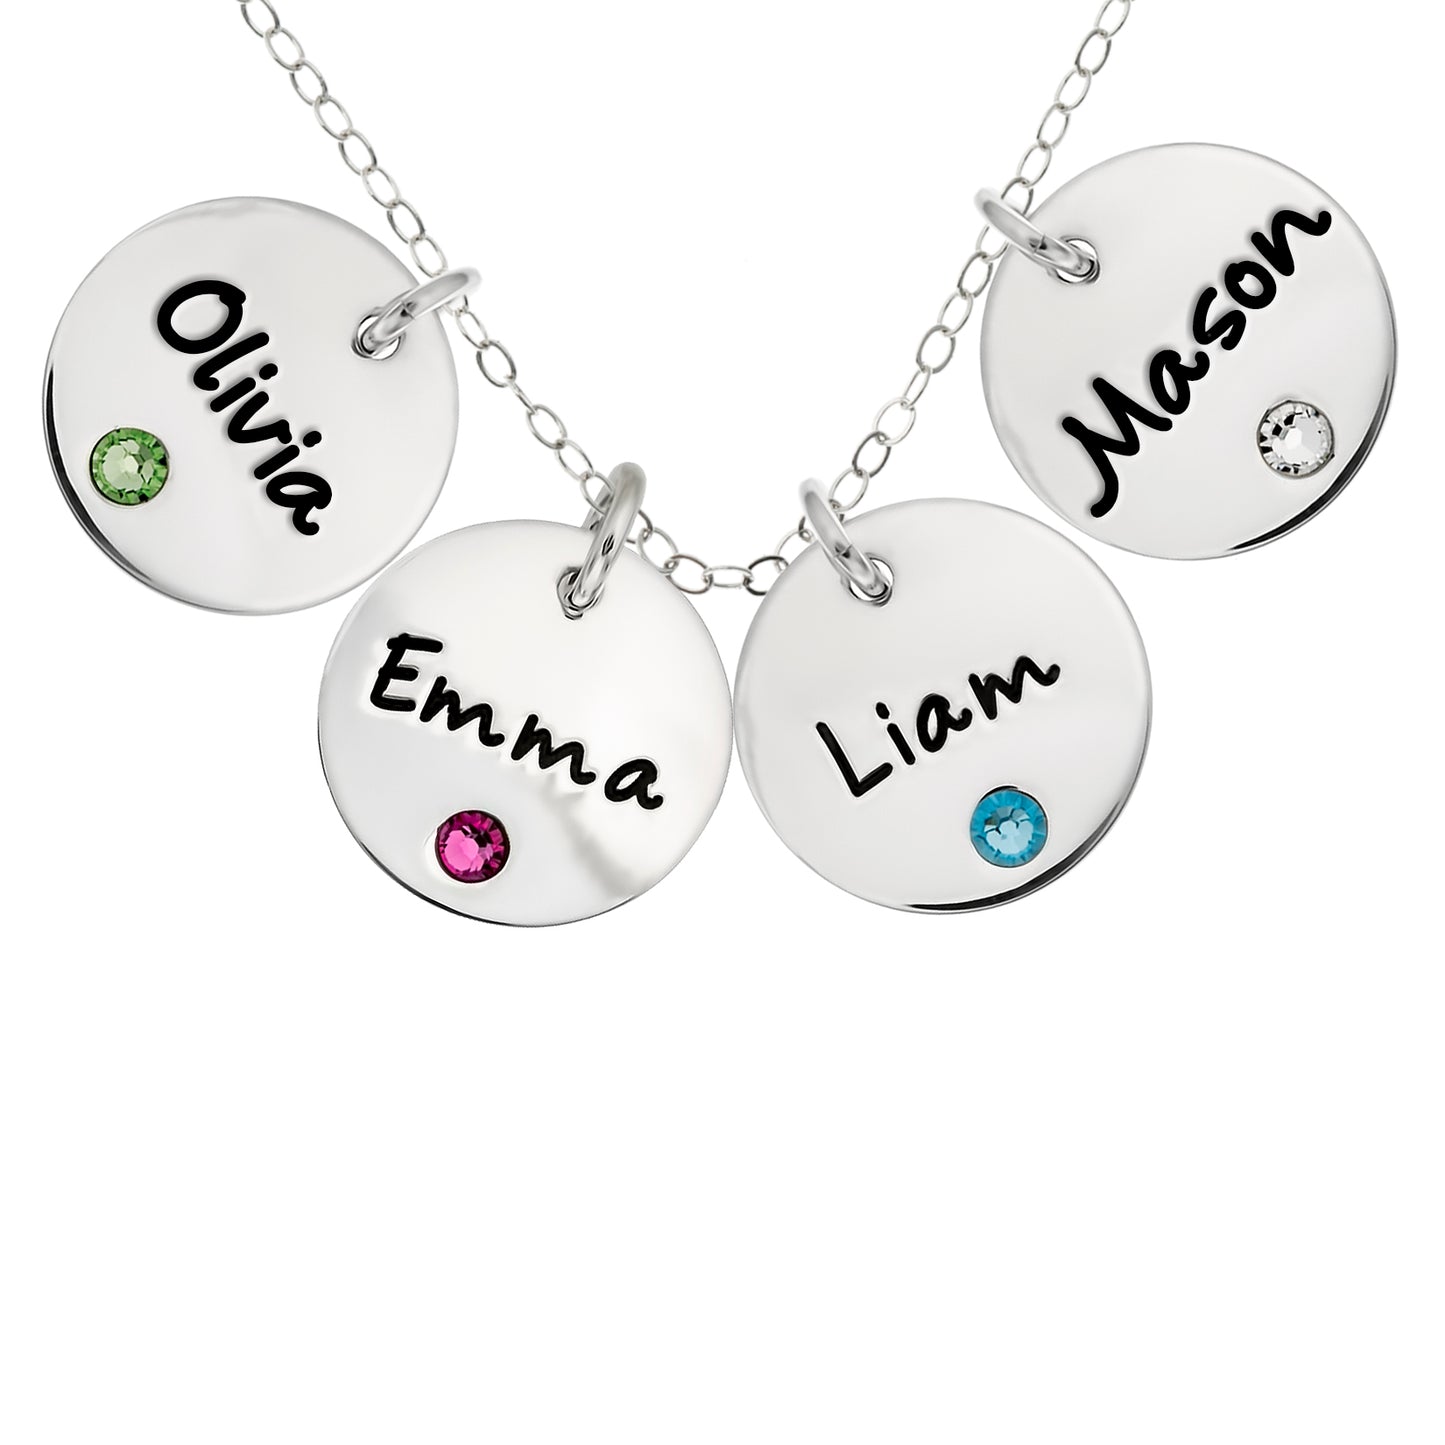 Personalized Sterling Silver Quadruple Round Name Charm Necklace with Choice of Swarovski Birthstone Settings